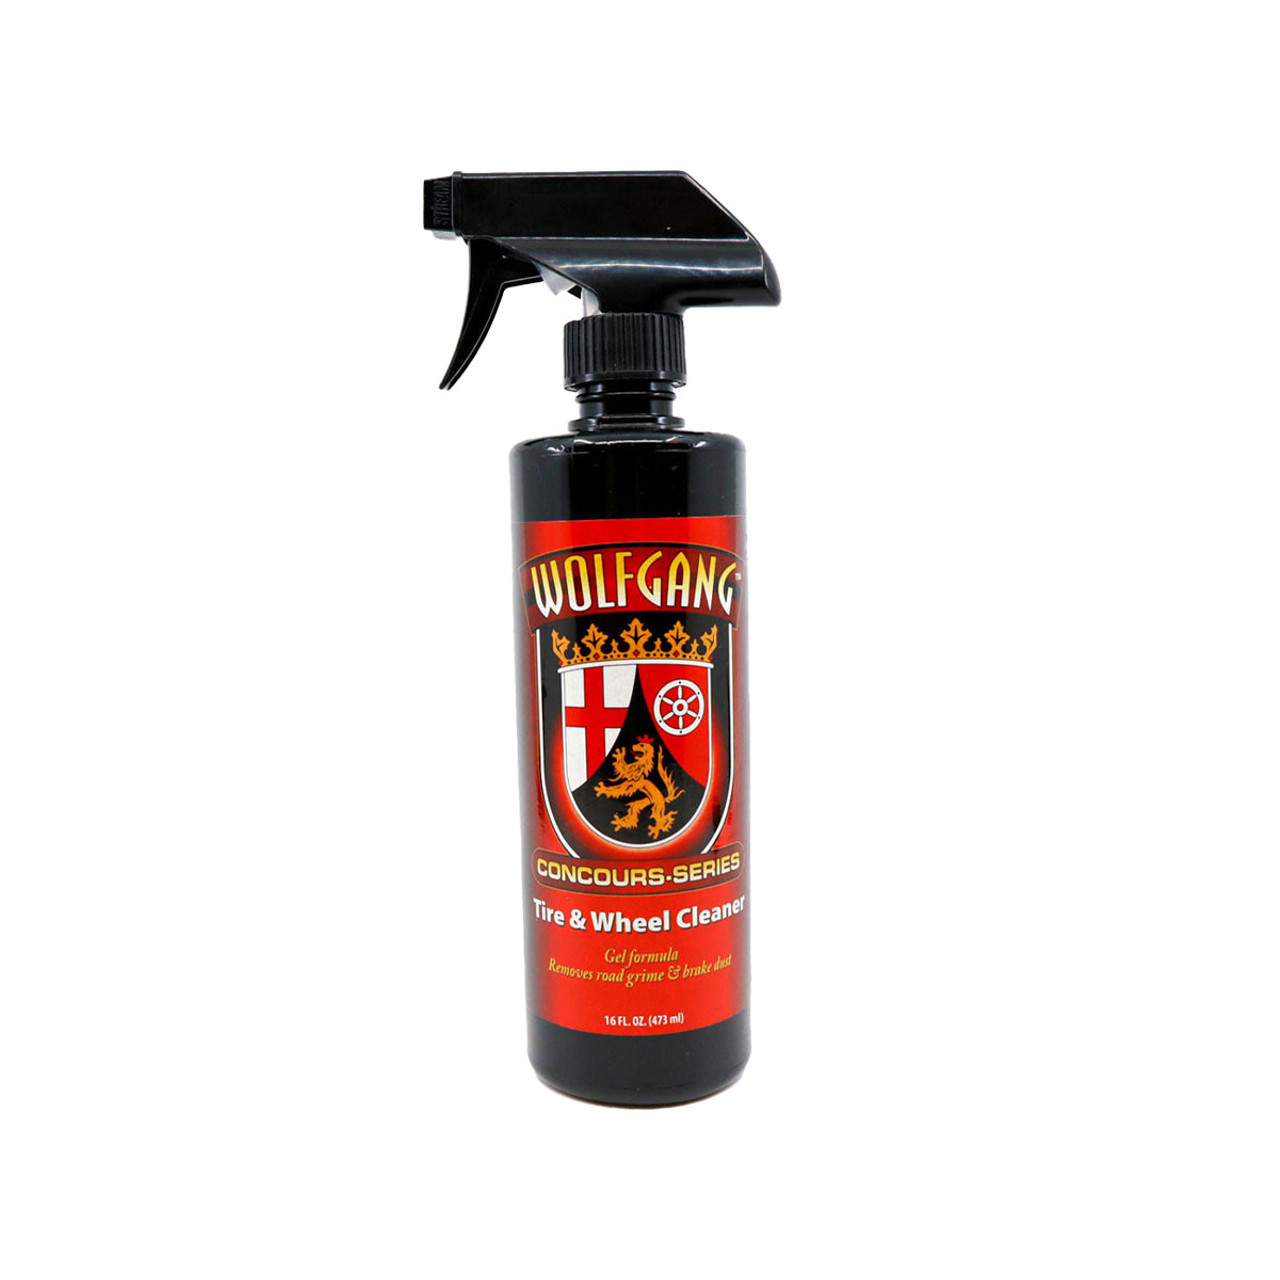 MOTHERS PRO STRENGTH CHROME WHEEL CLEANER 24 OZ 